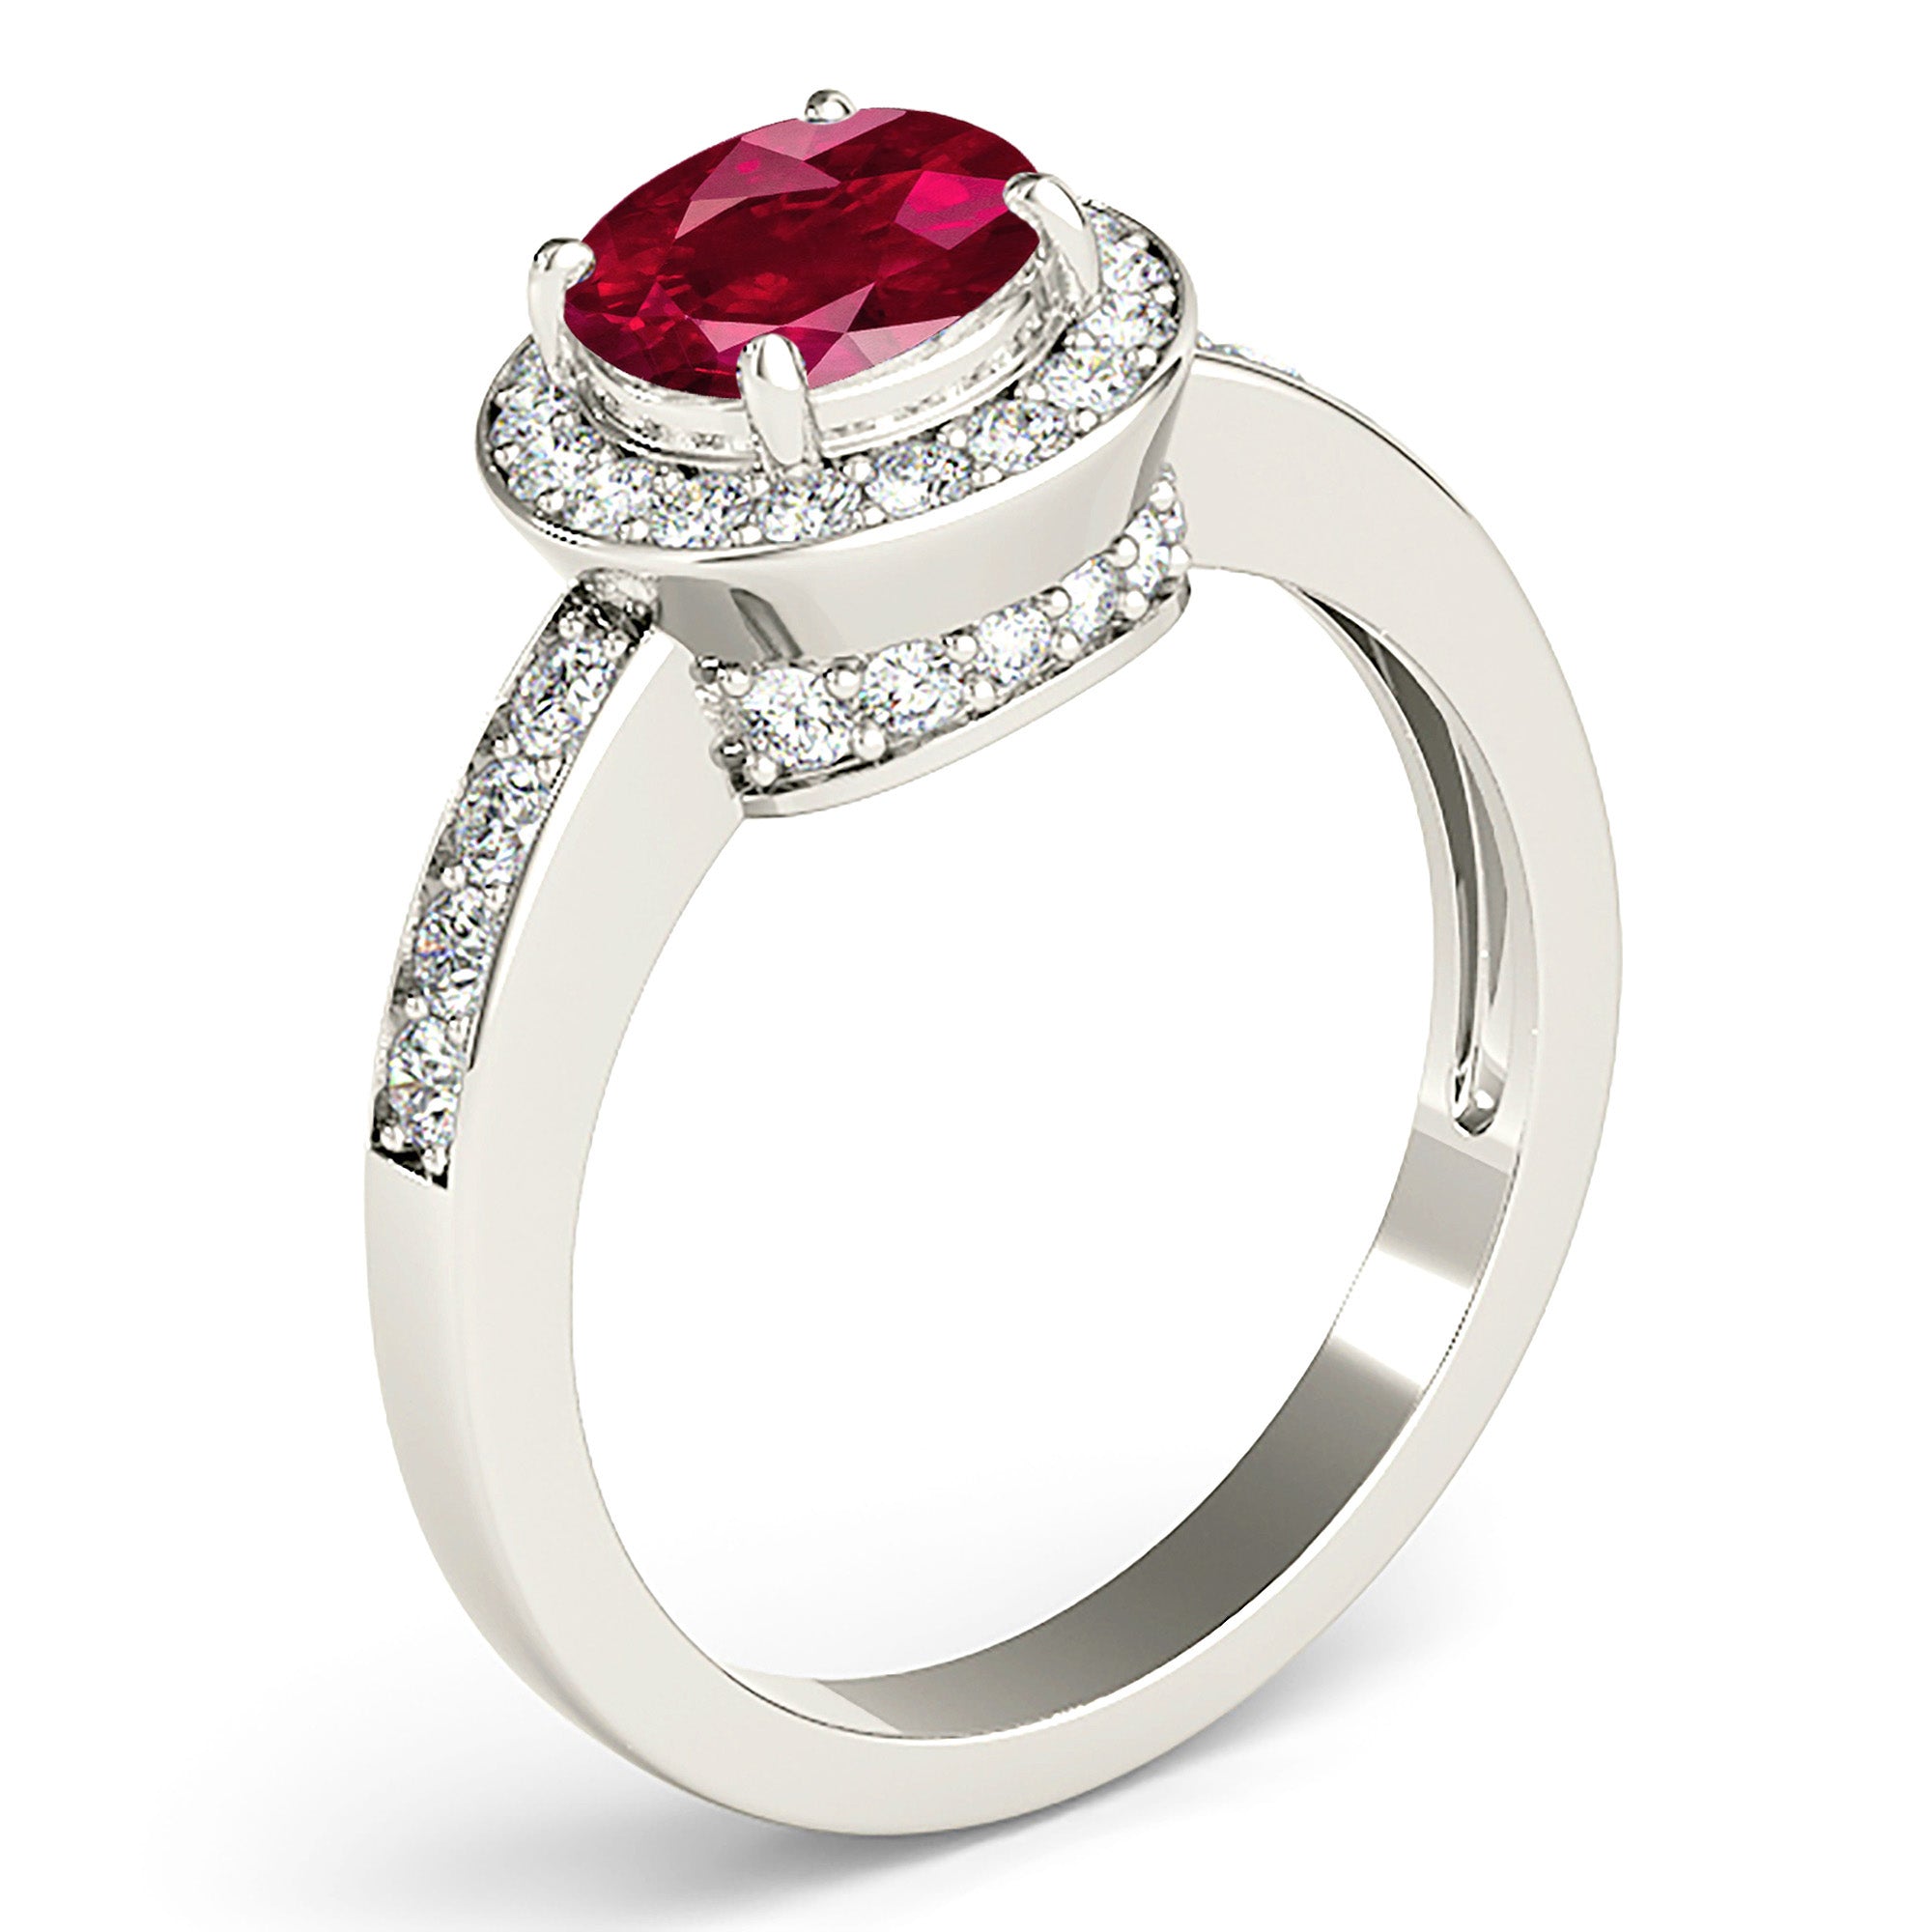 1.79 ct. Genuine Ruby Ring With 0.50 ctw. Channel Set Diamond Halo And Thin Diamond Band-in 14K/18K White, Yellow, Rose Gold and Platinum - Christmas Jewelry Gift -VIRABYANI